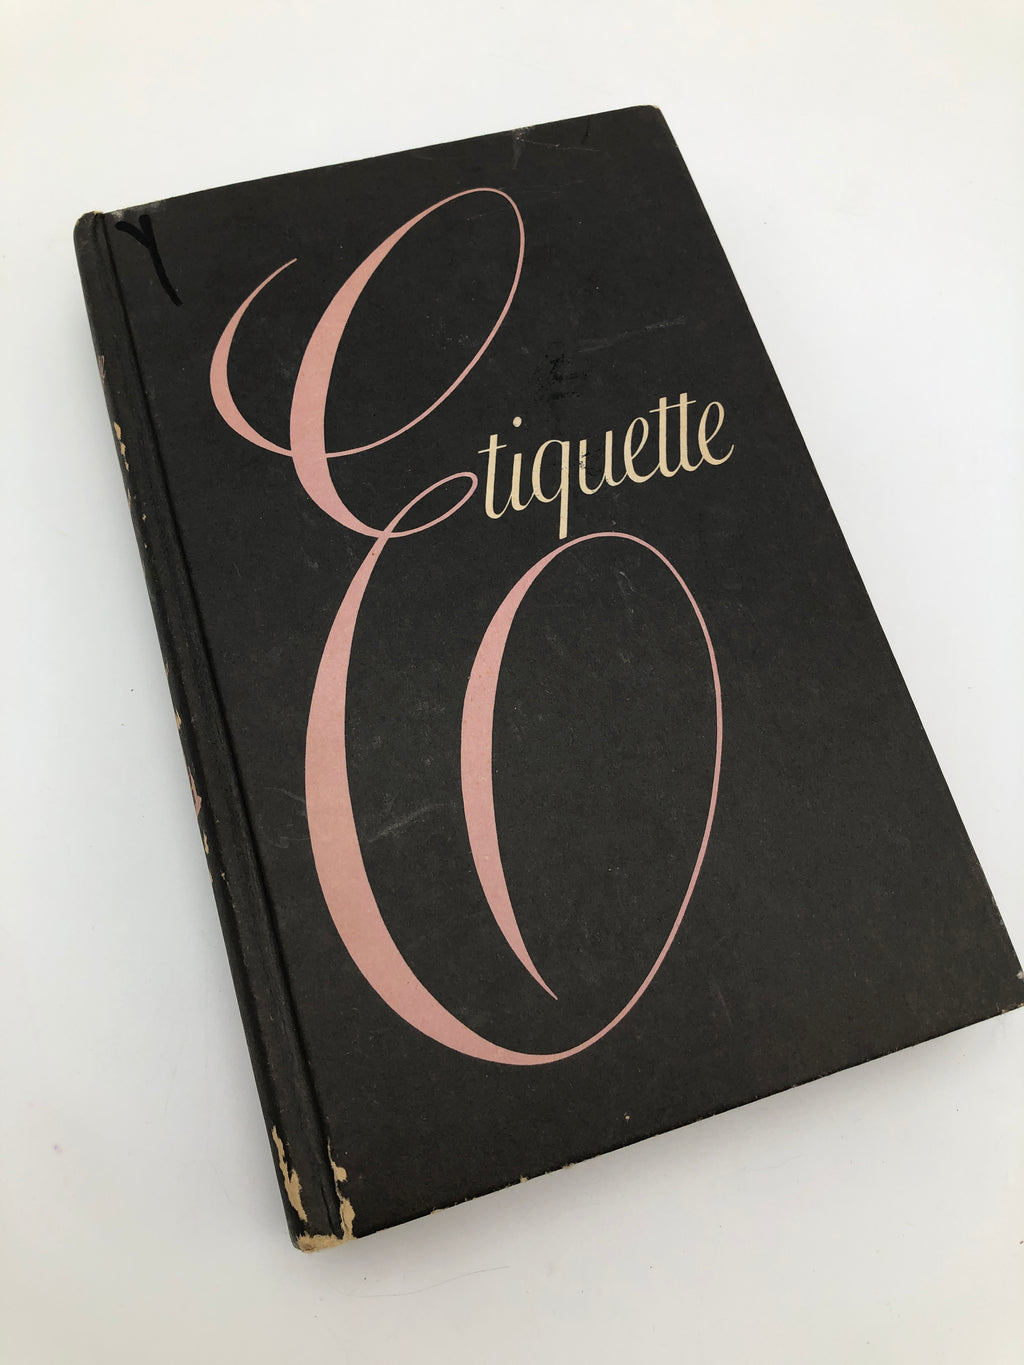 Etiquette, 1956, First Edition